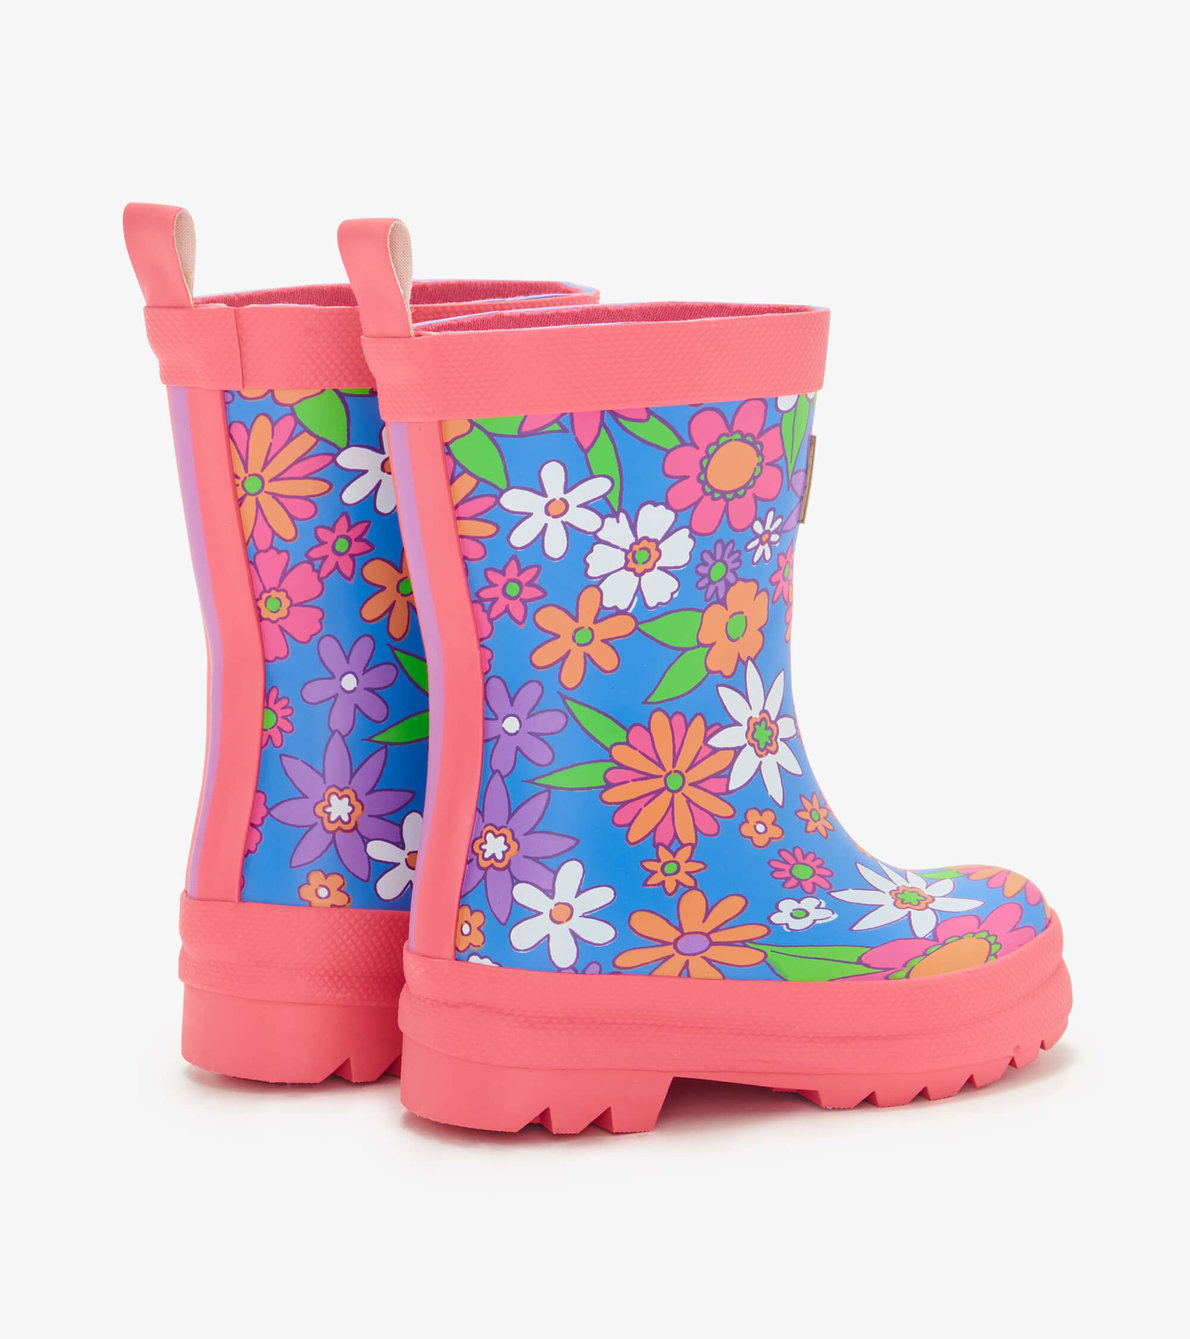 View larger image of My 1st Rain Boots - Retro Floral